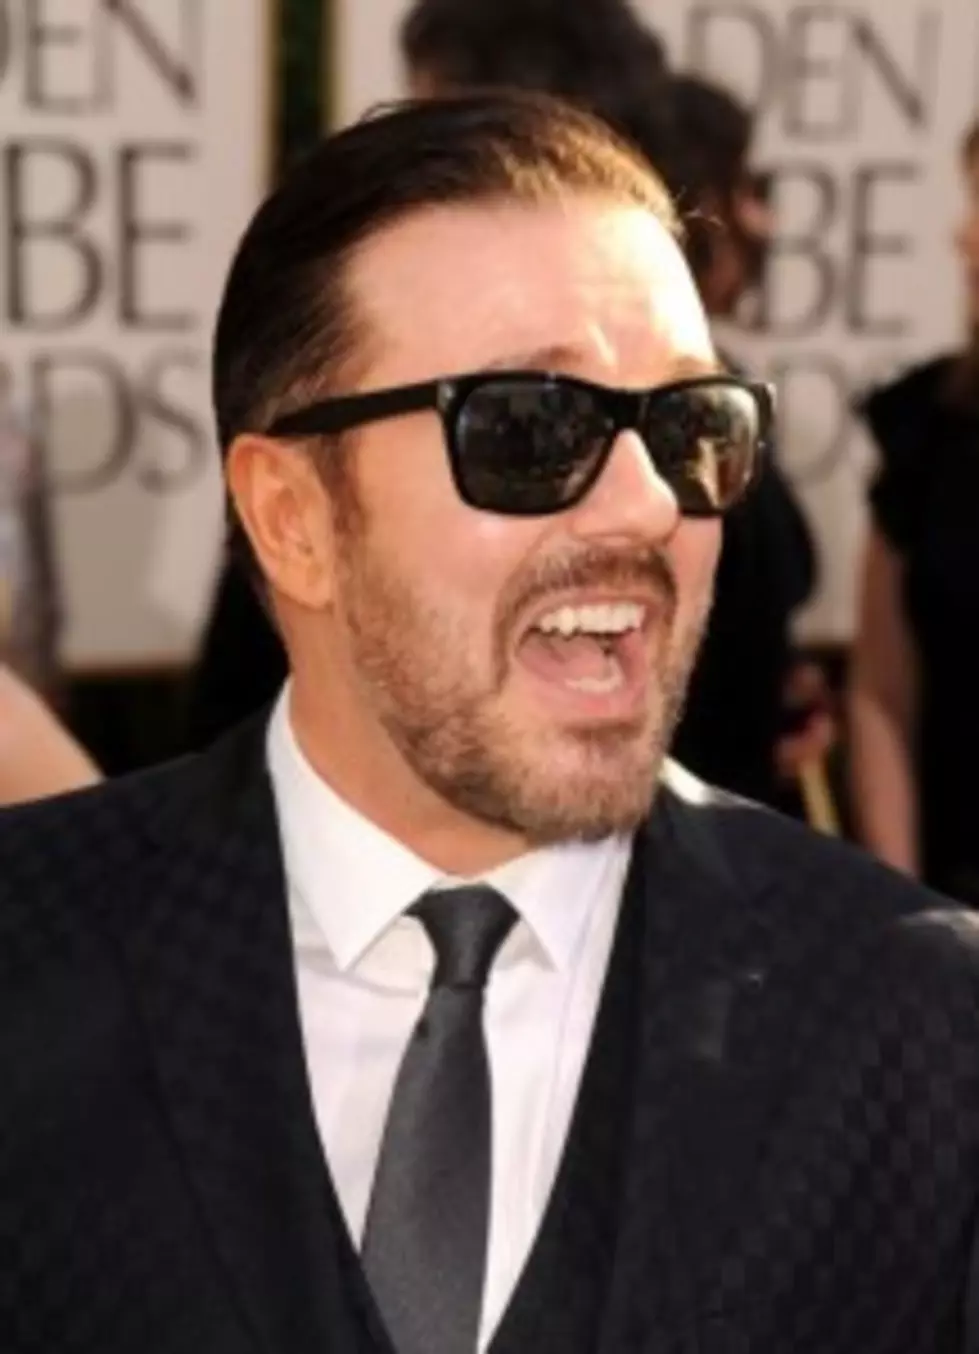 No More Globes for Gervais After Controversial Hosting!